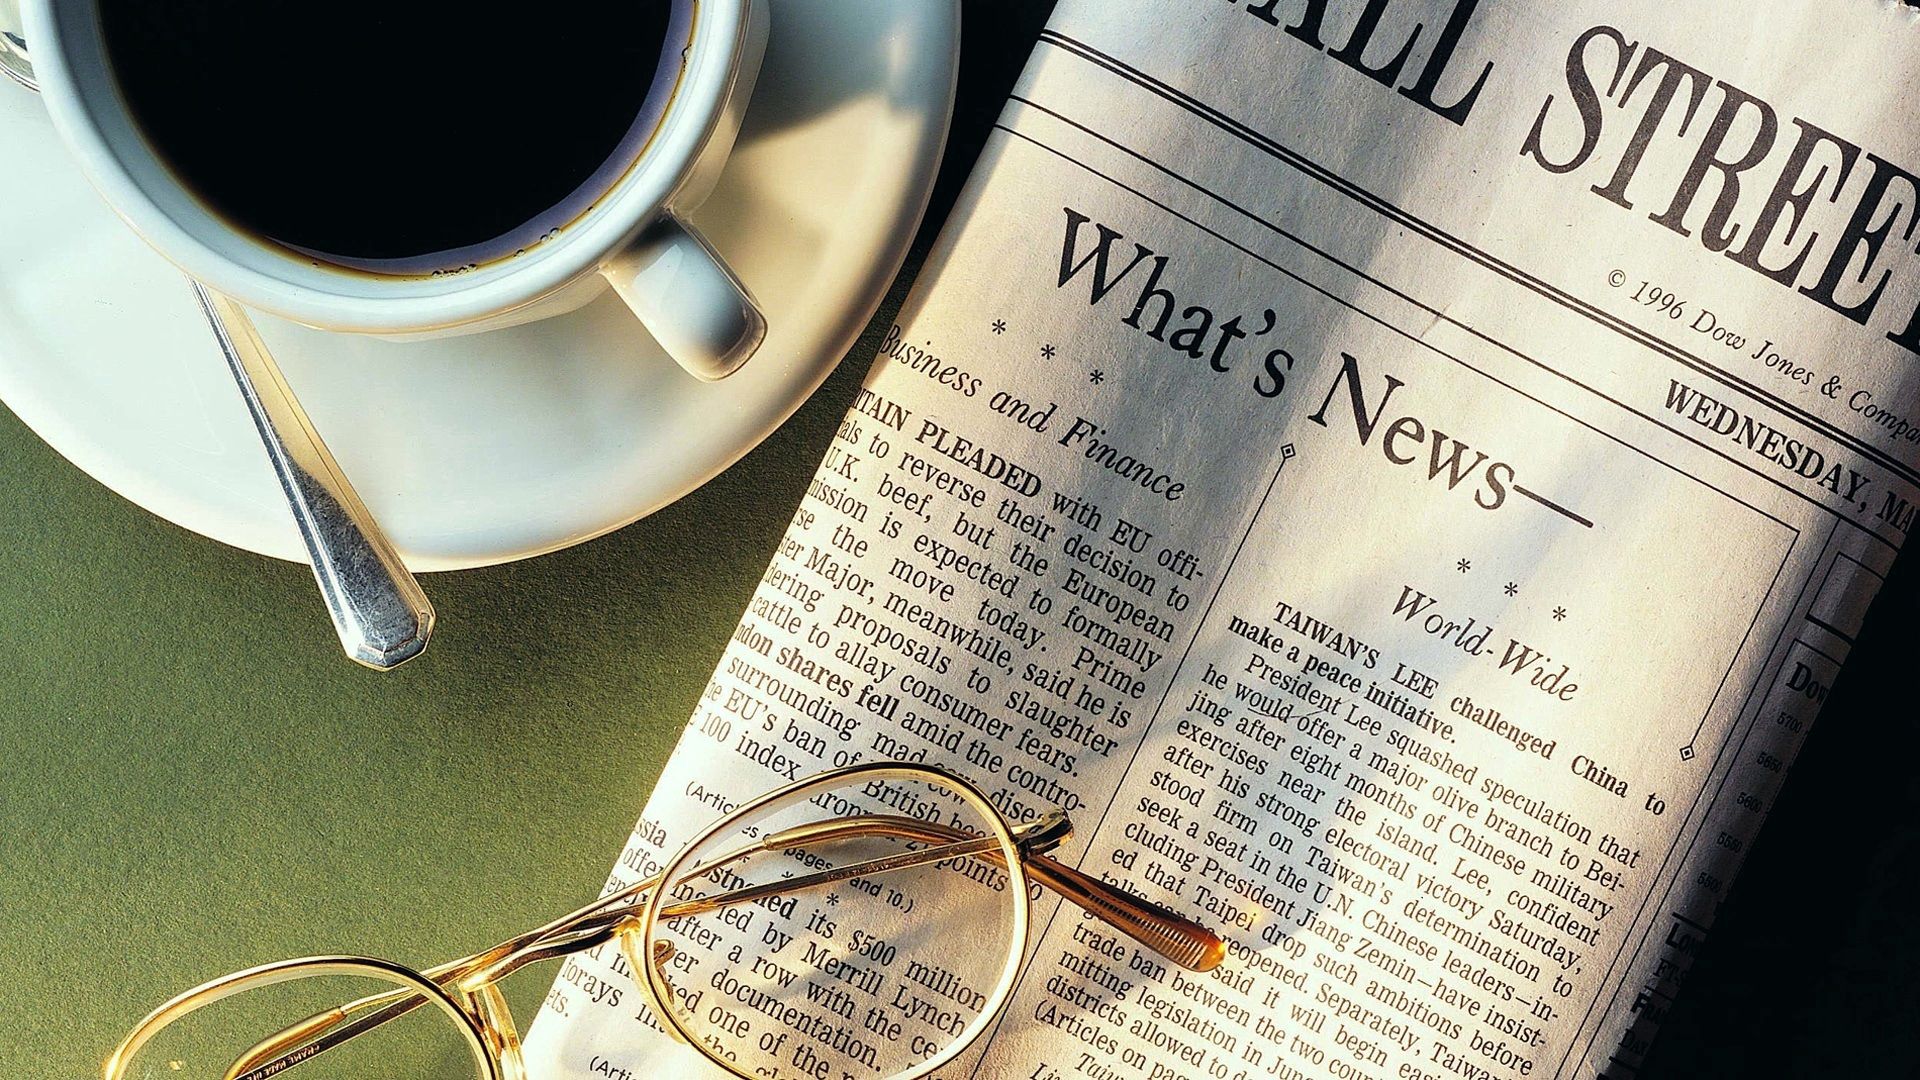 coffee, food, cup, glasses, spectacles, newspaper, spoon, news, cup holder Image for desktop